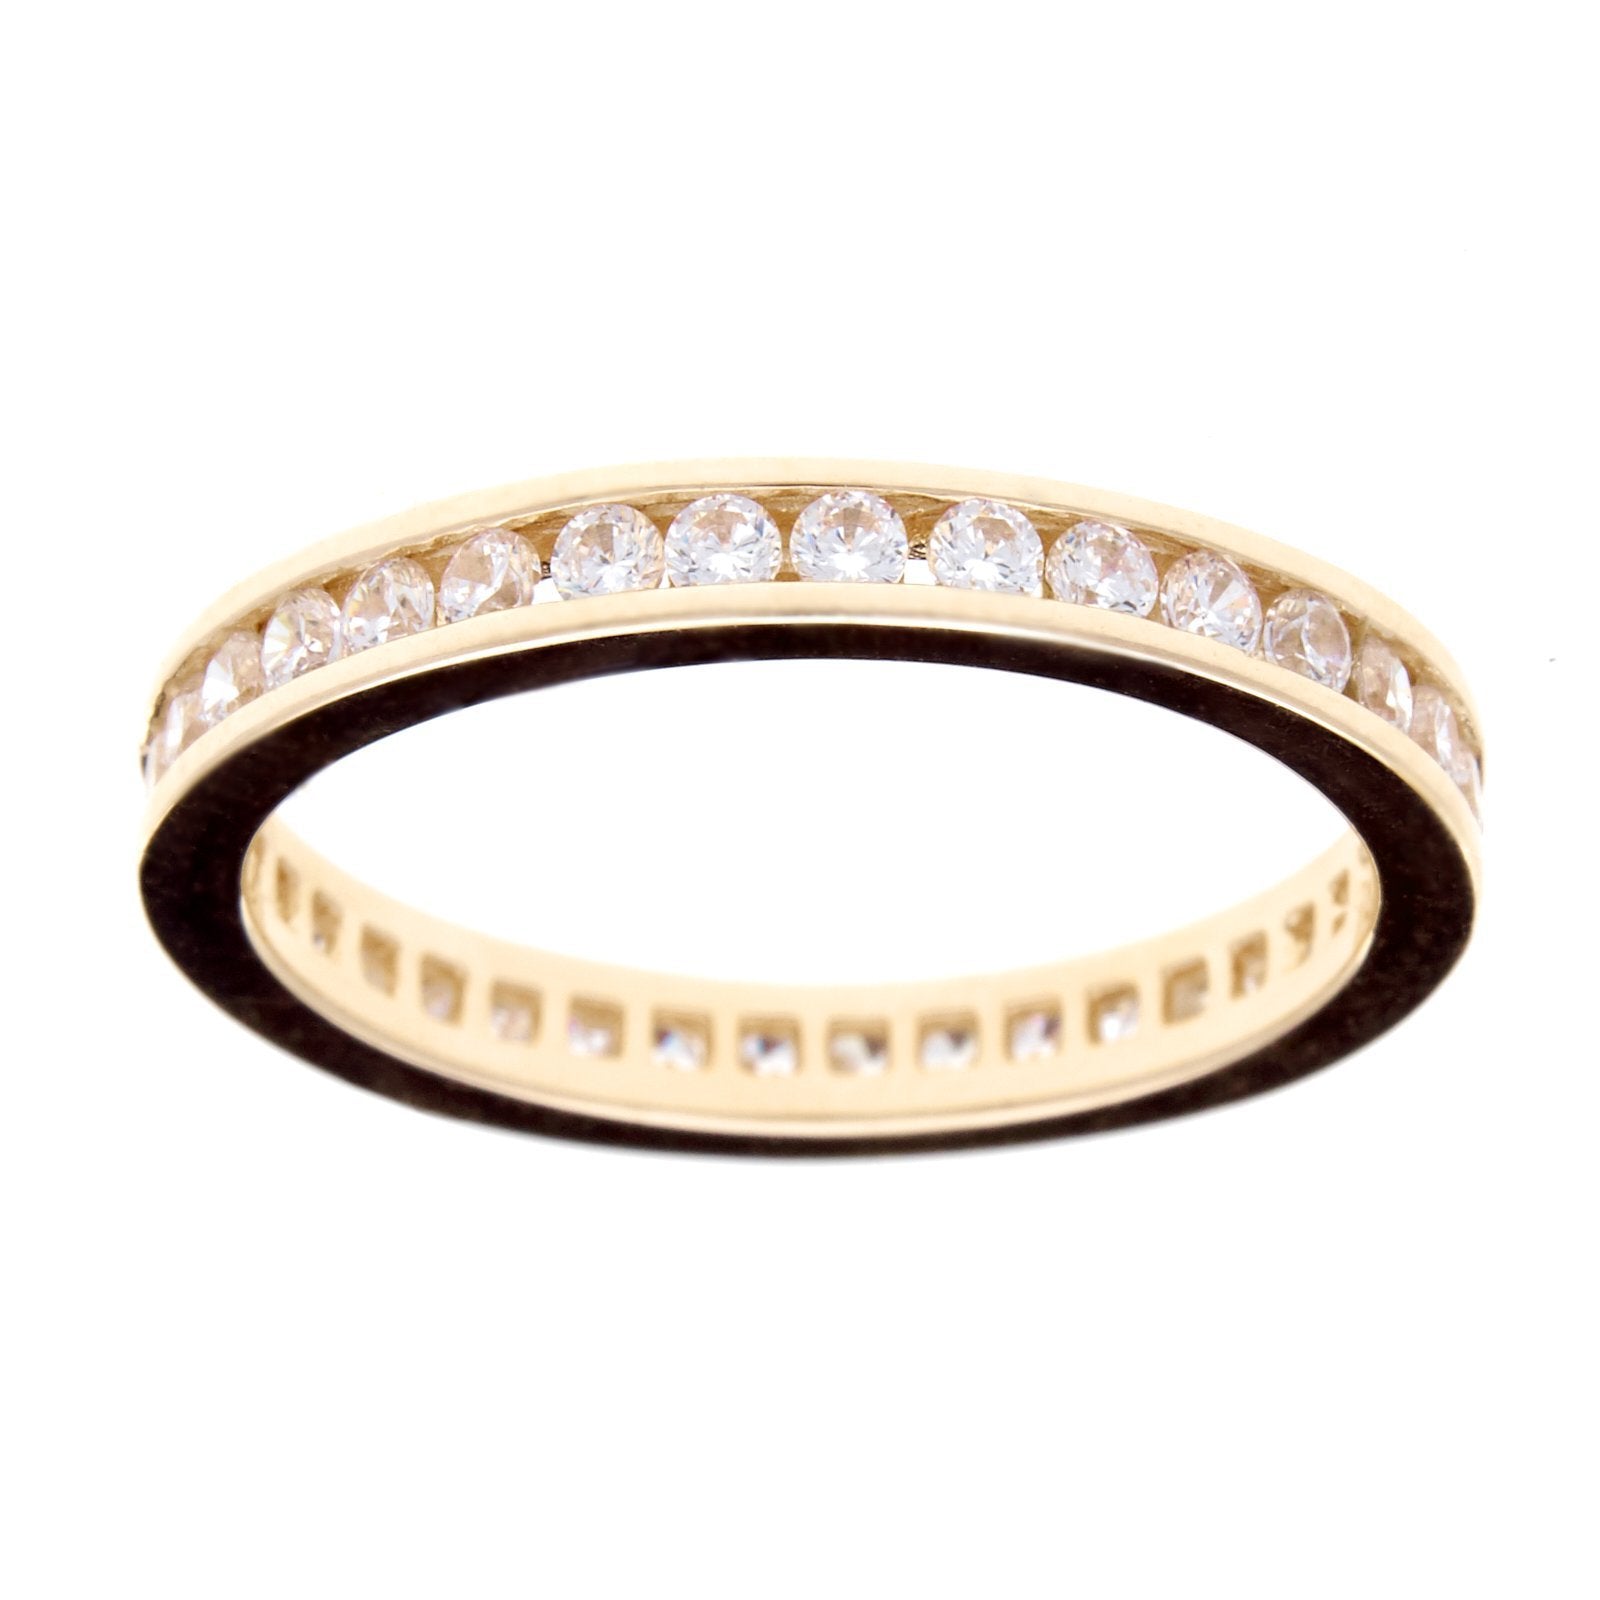 Sybella Rings Sybella gold eternity ring